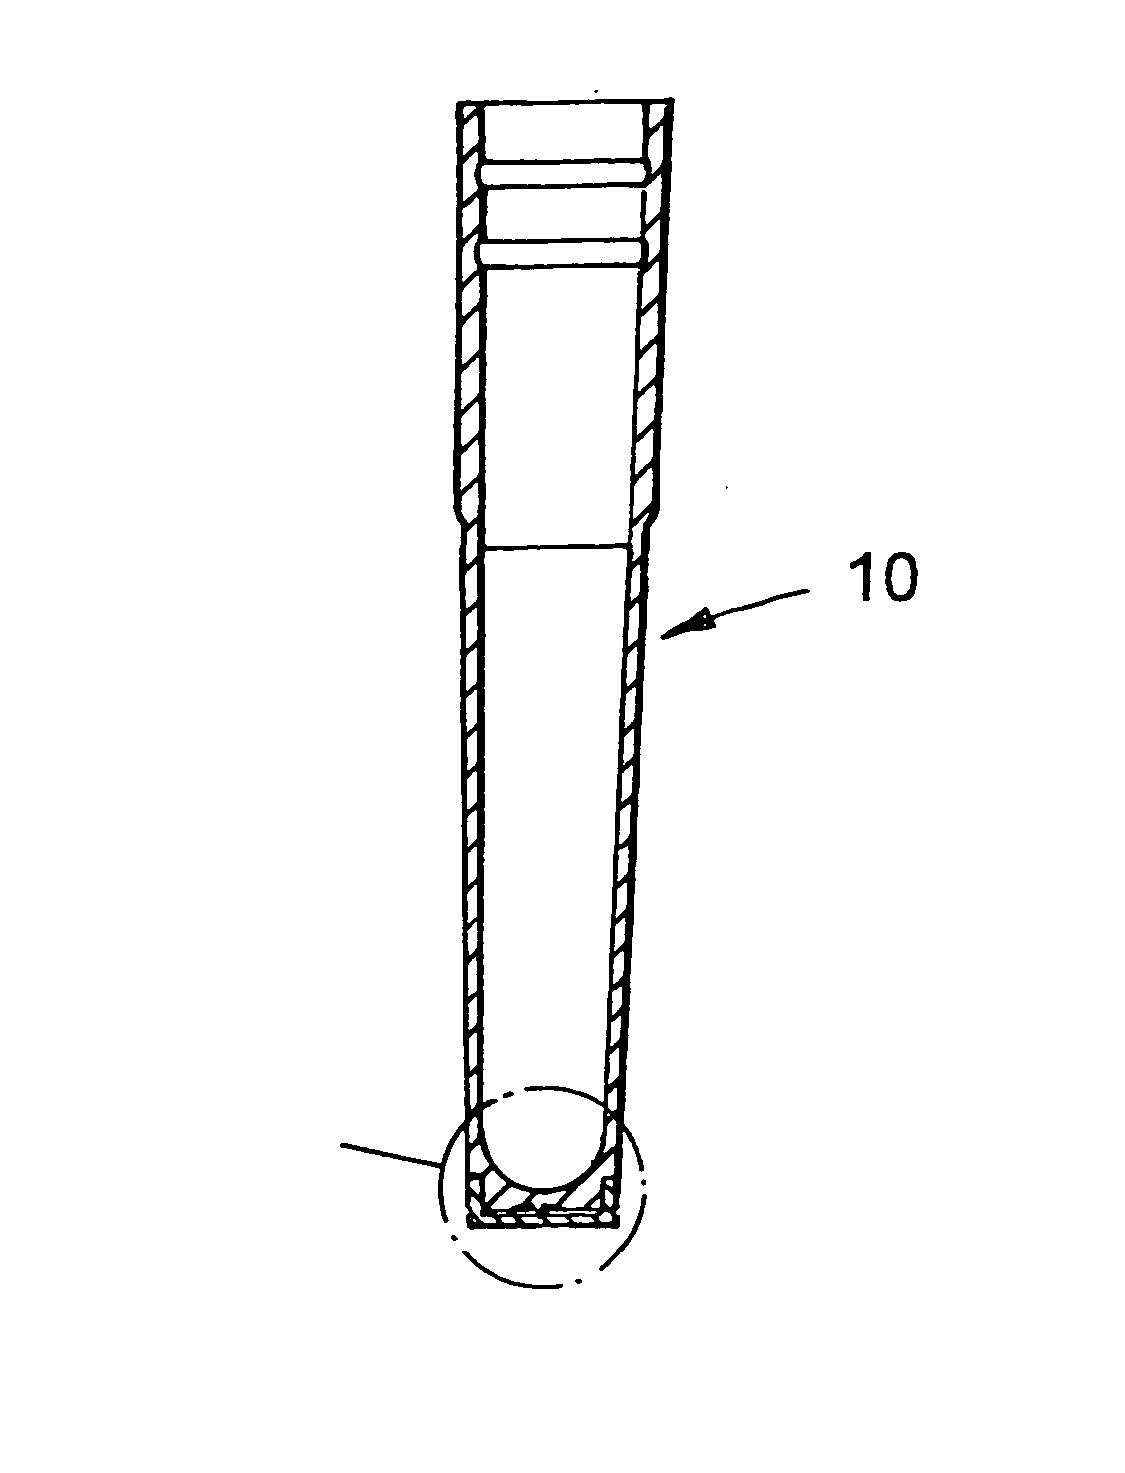 Sample tube assemblies and methods of constructing such sample tube assemblies